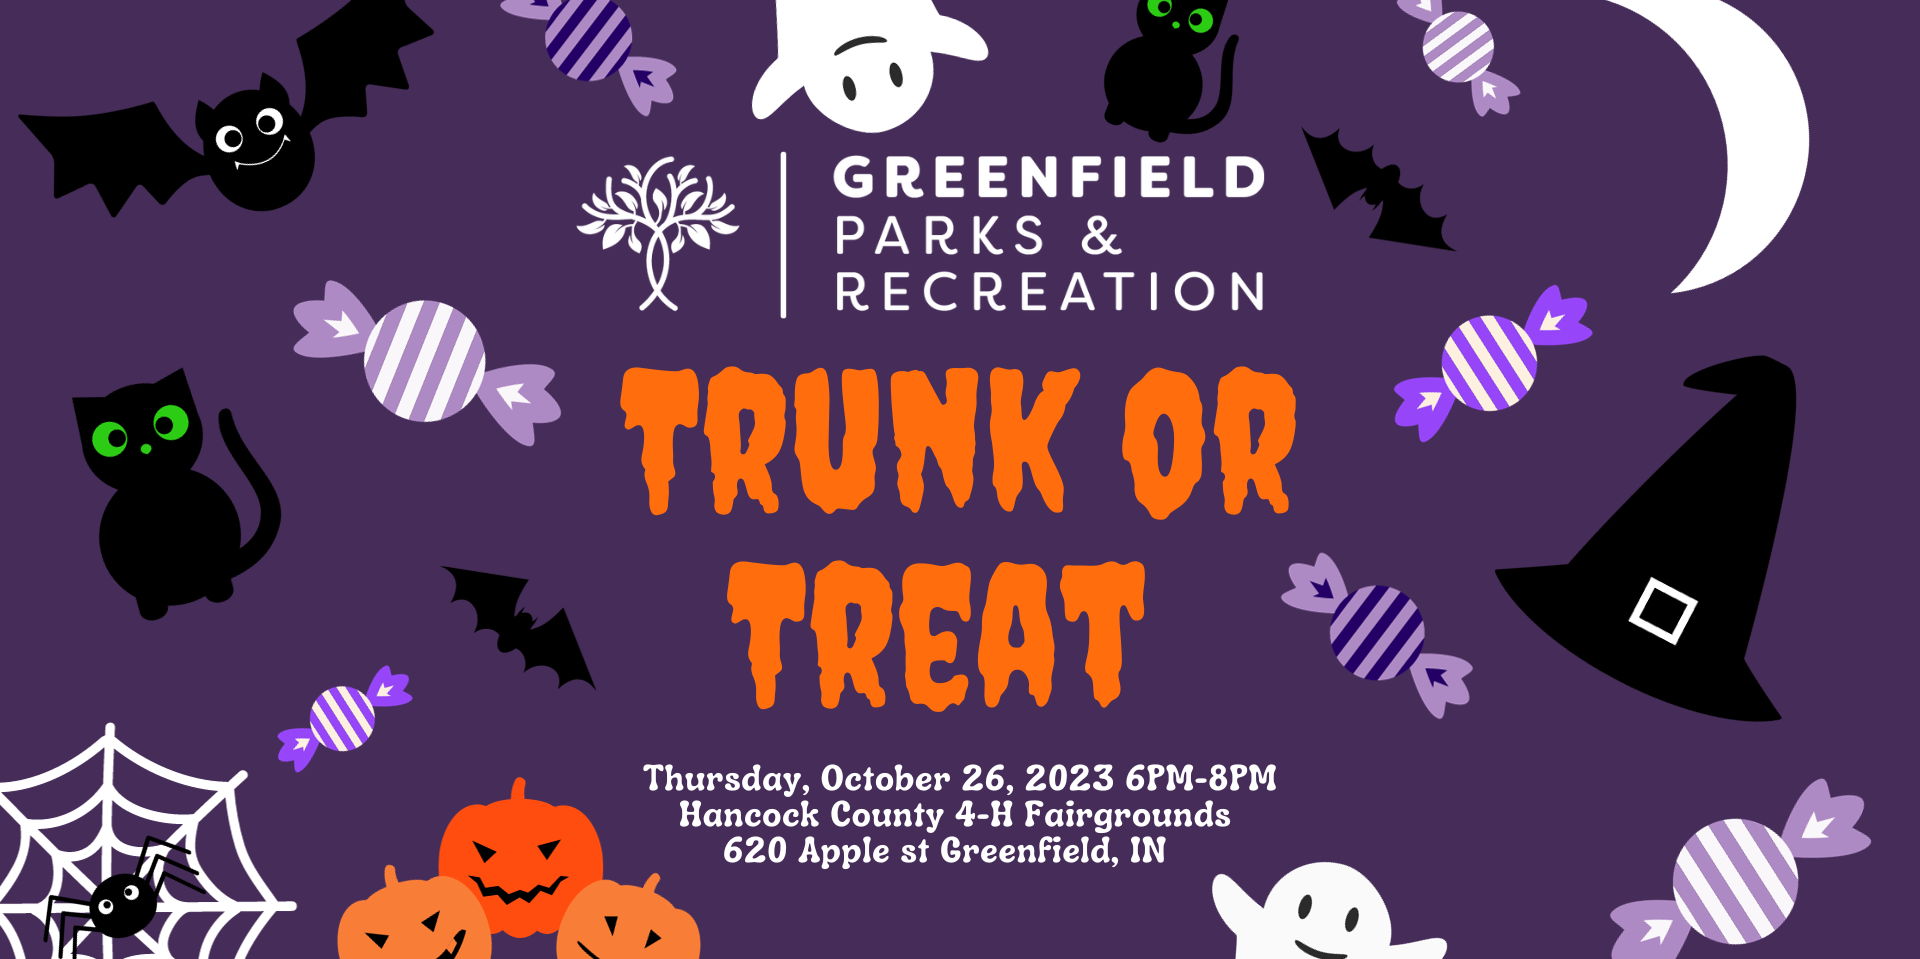 FREE TRUNK OR TREAT 2023 promotional image